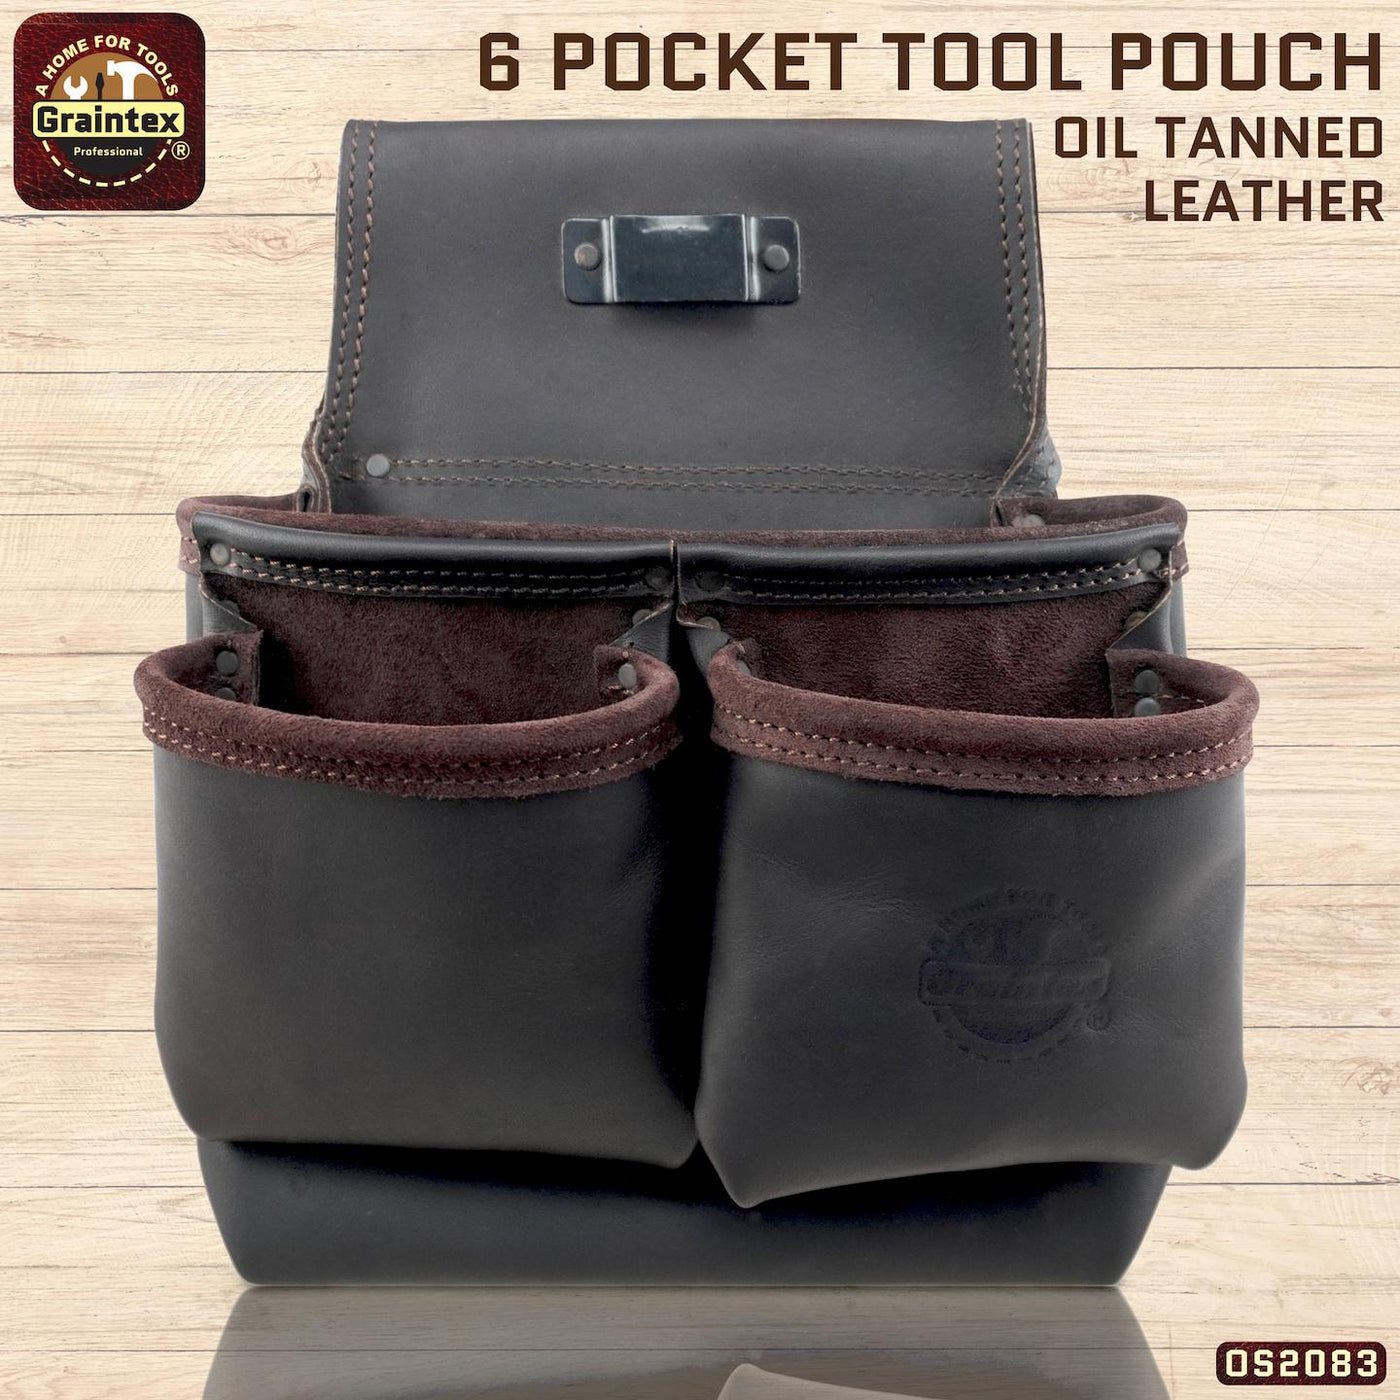 OS2083 :: 6 Pocket Framer’s Nail & Tool Pouch Brown Color Top Grain Oil Tanned Leather